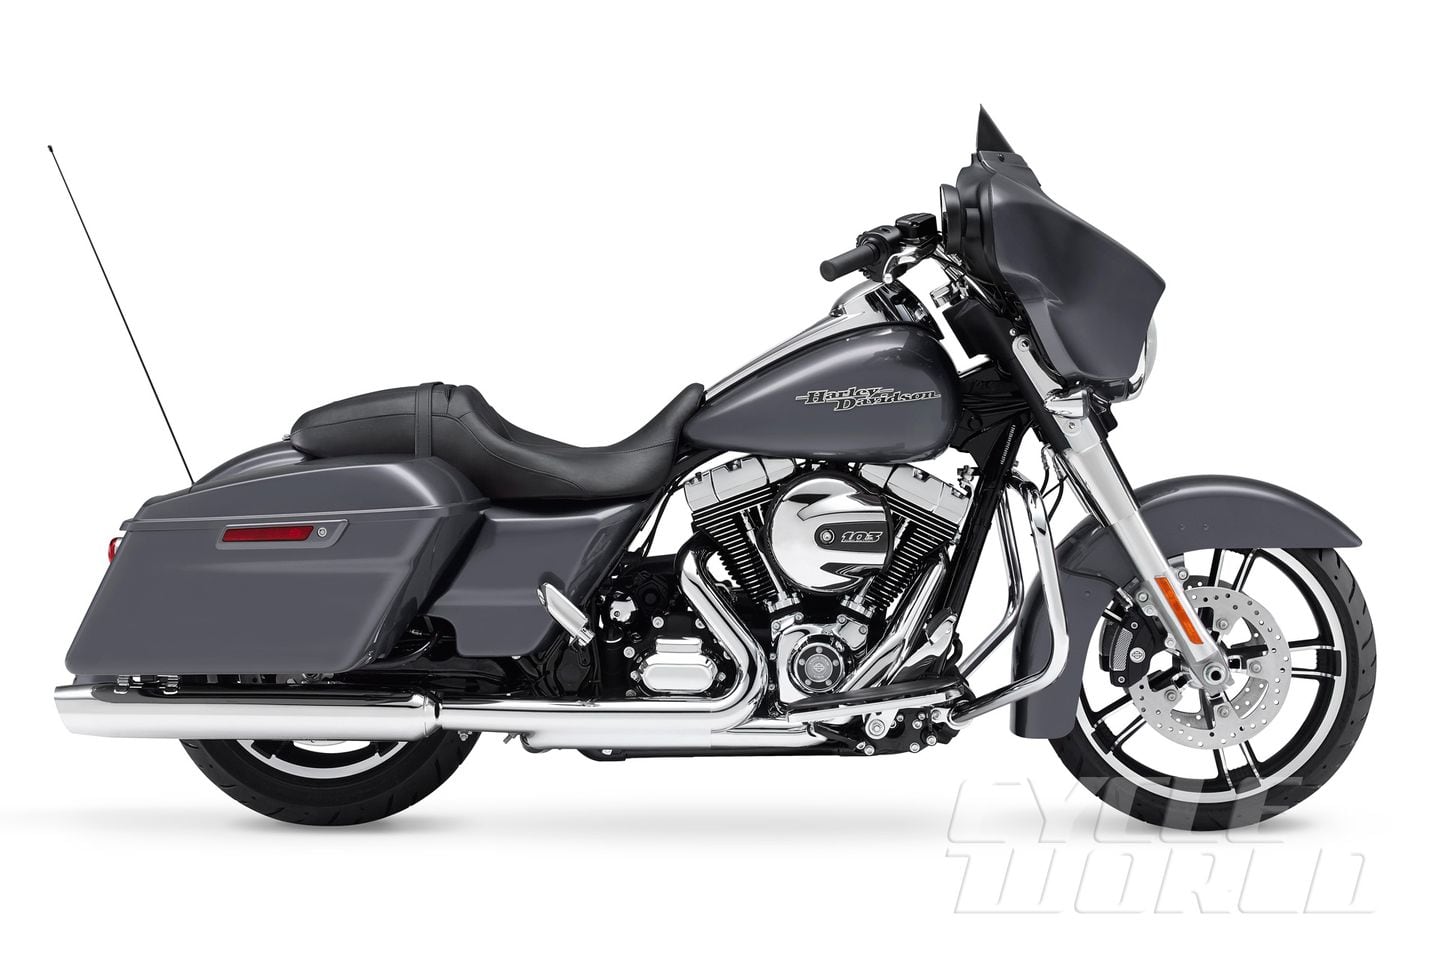 2014 Harley Davidson Street Glide Special Test Review Photos Specs Cycle World